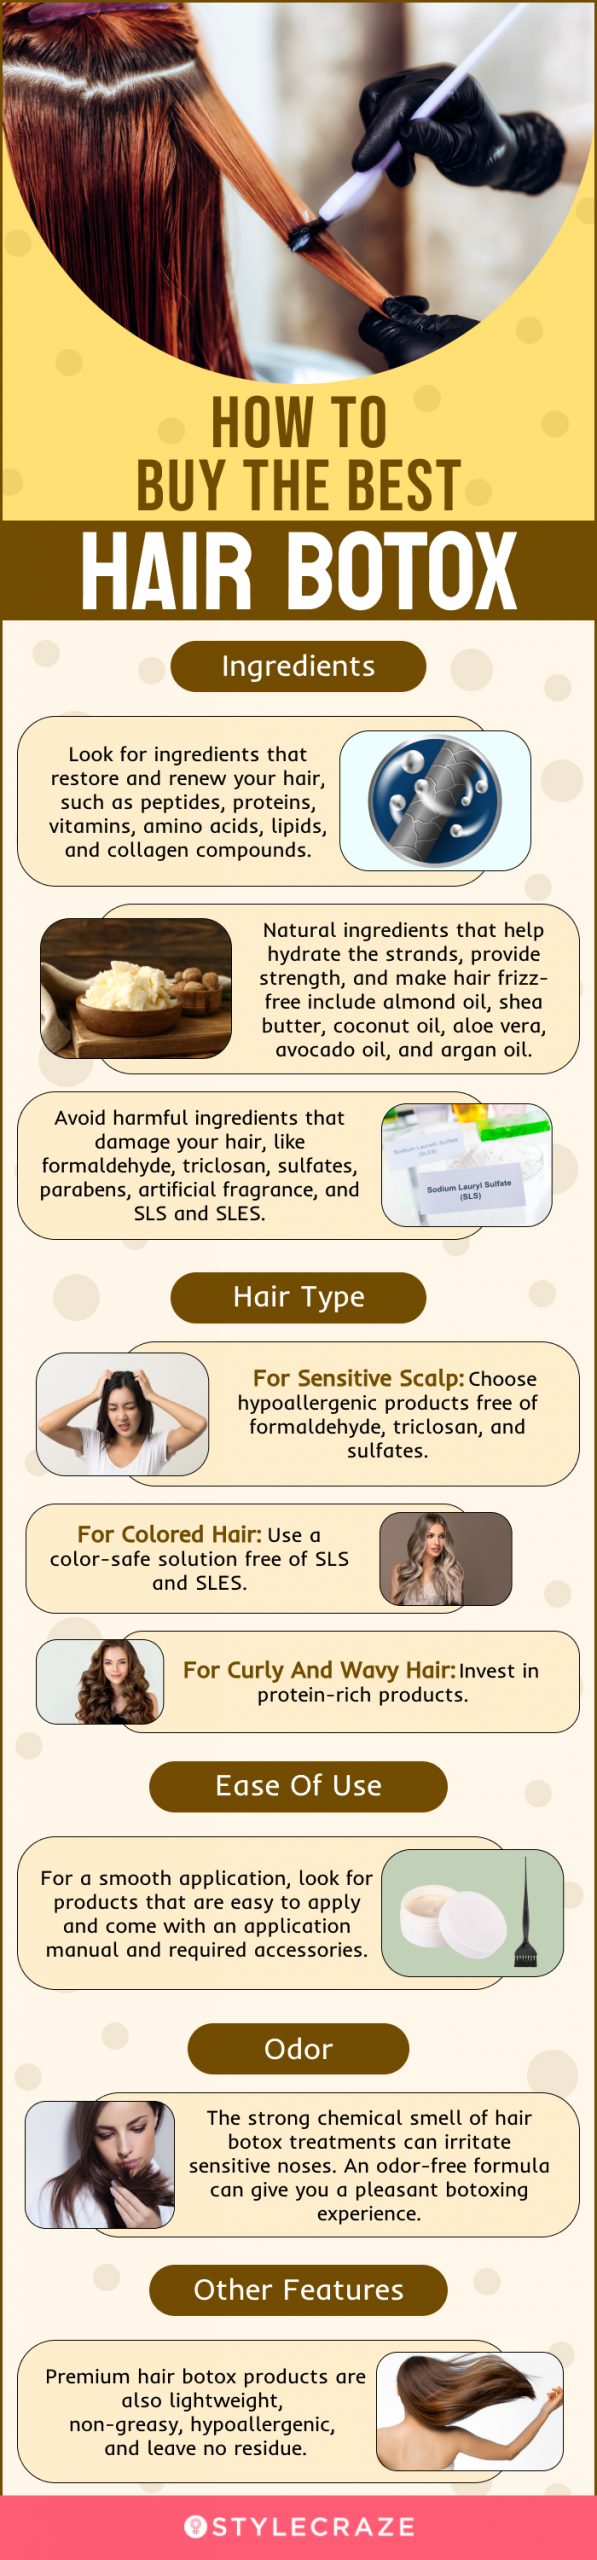 How To Buy The Best Hair Botox (infographic)